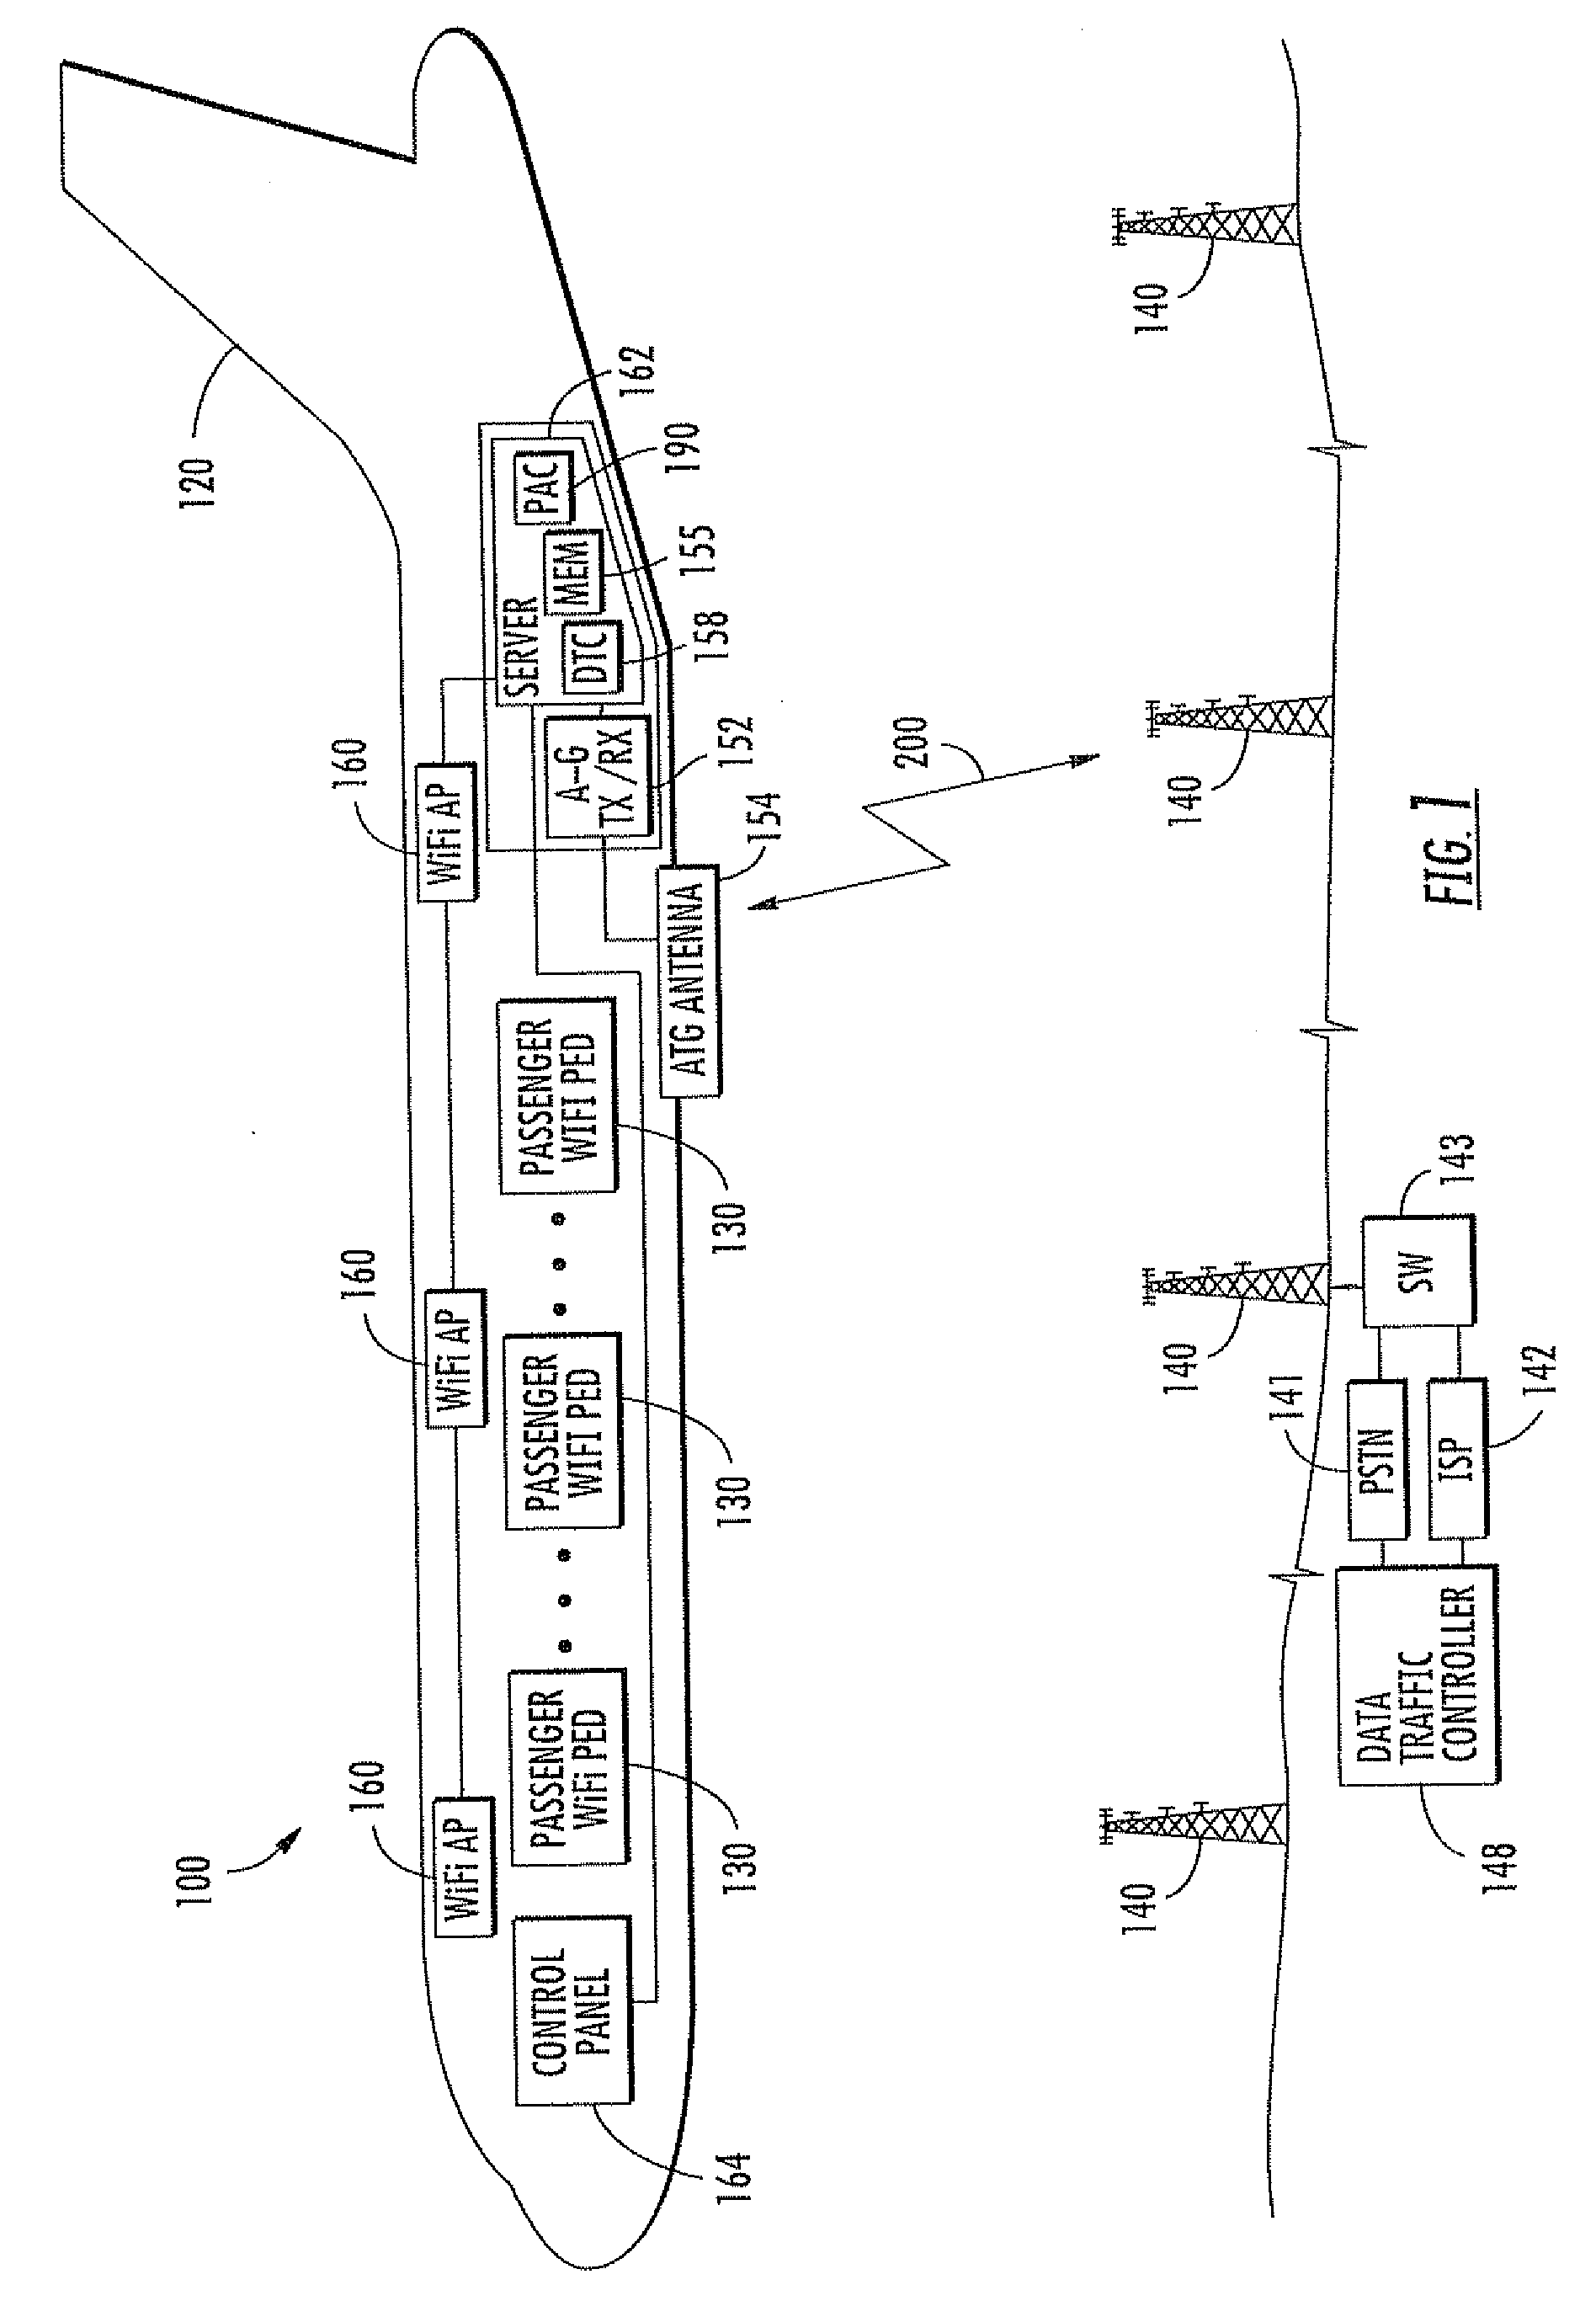 Aircraft in-flight entertainment system having a multi-beam phased array antenna and associated methods